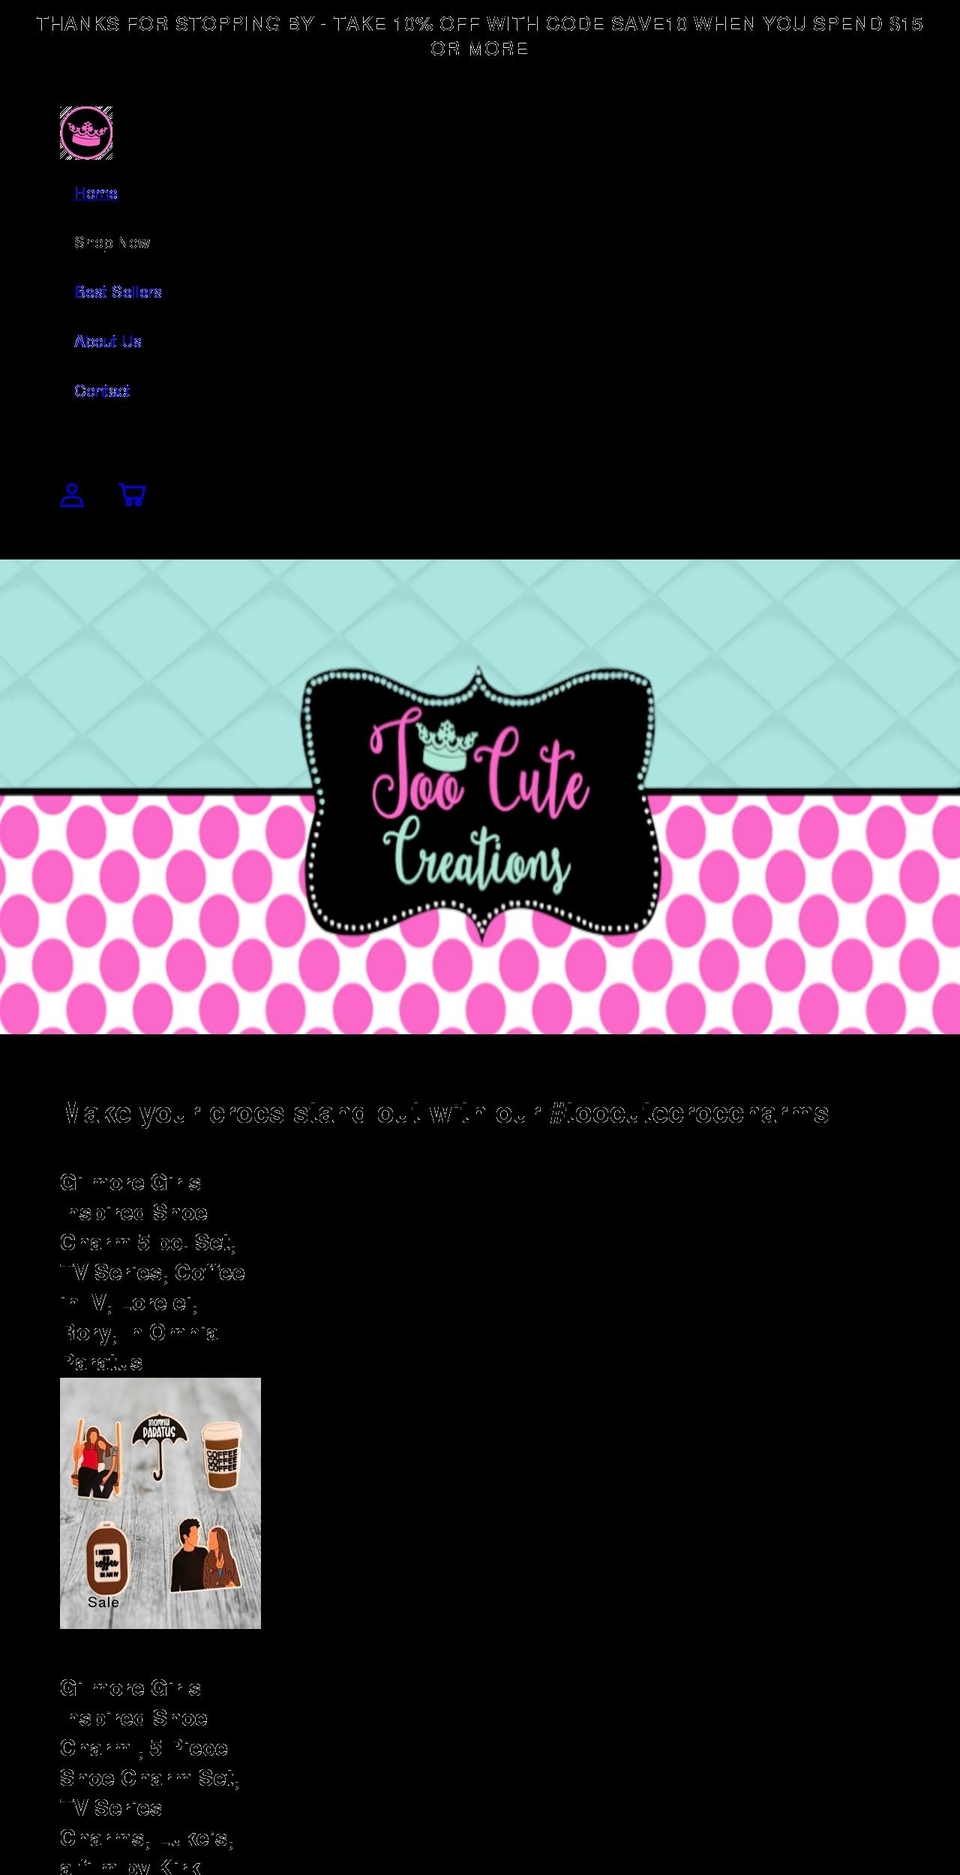 inspire Shopify theme site example toocutecreations.net